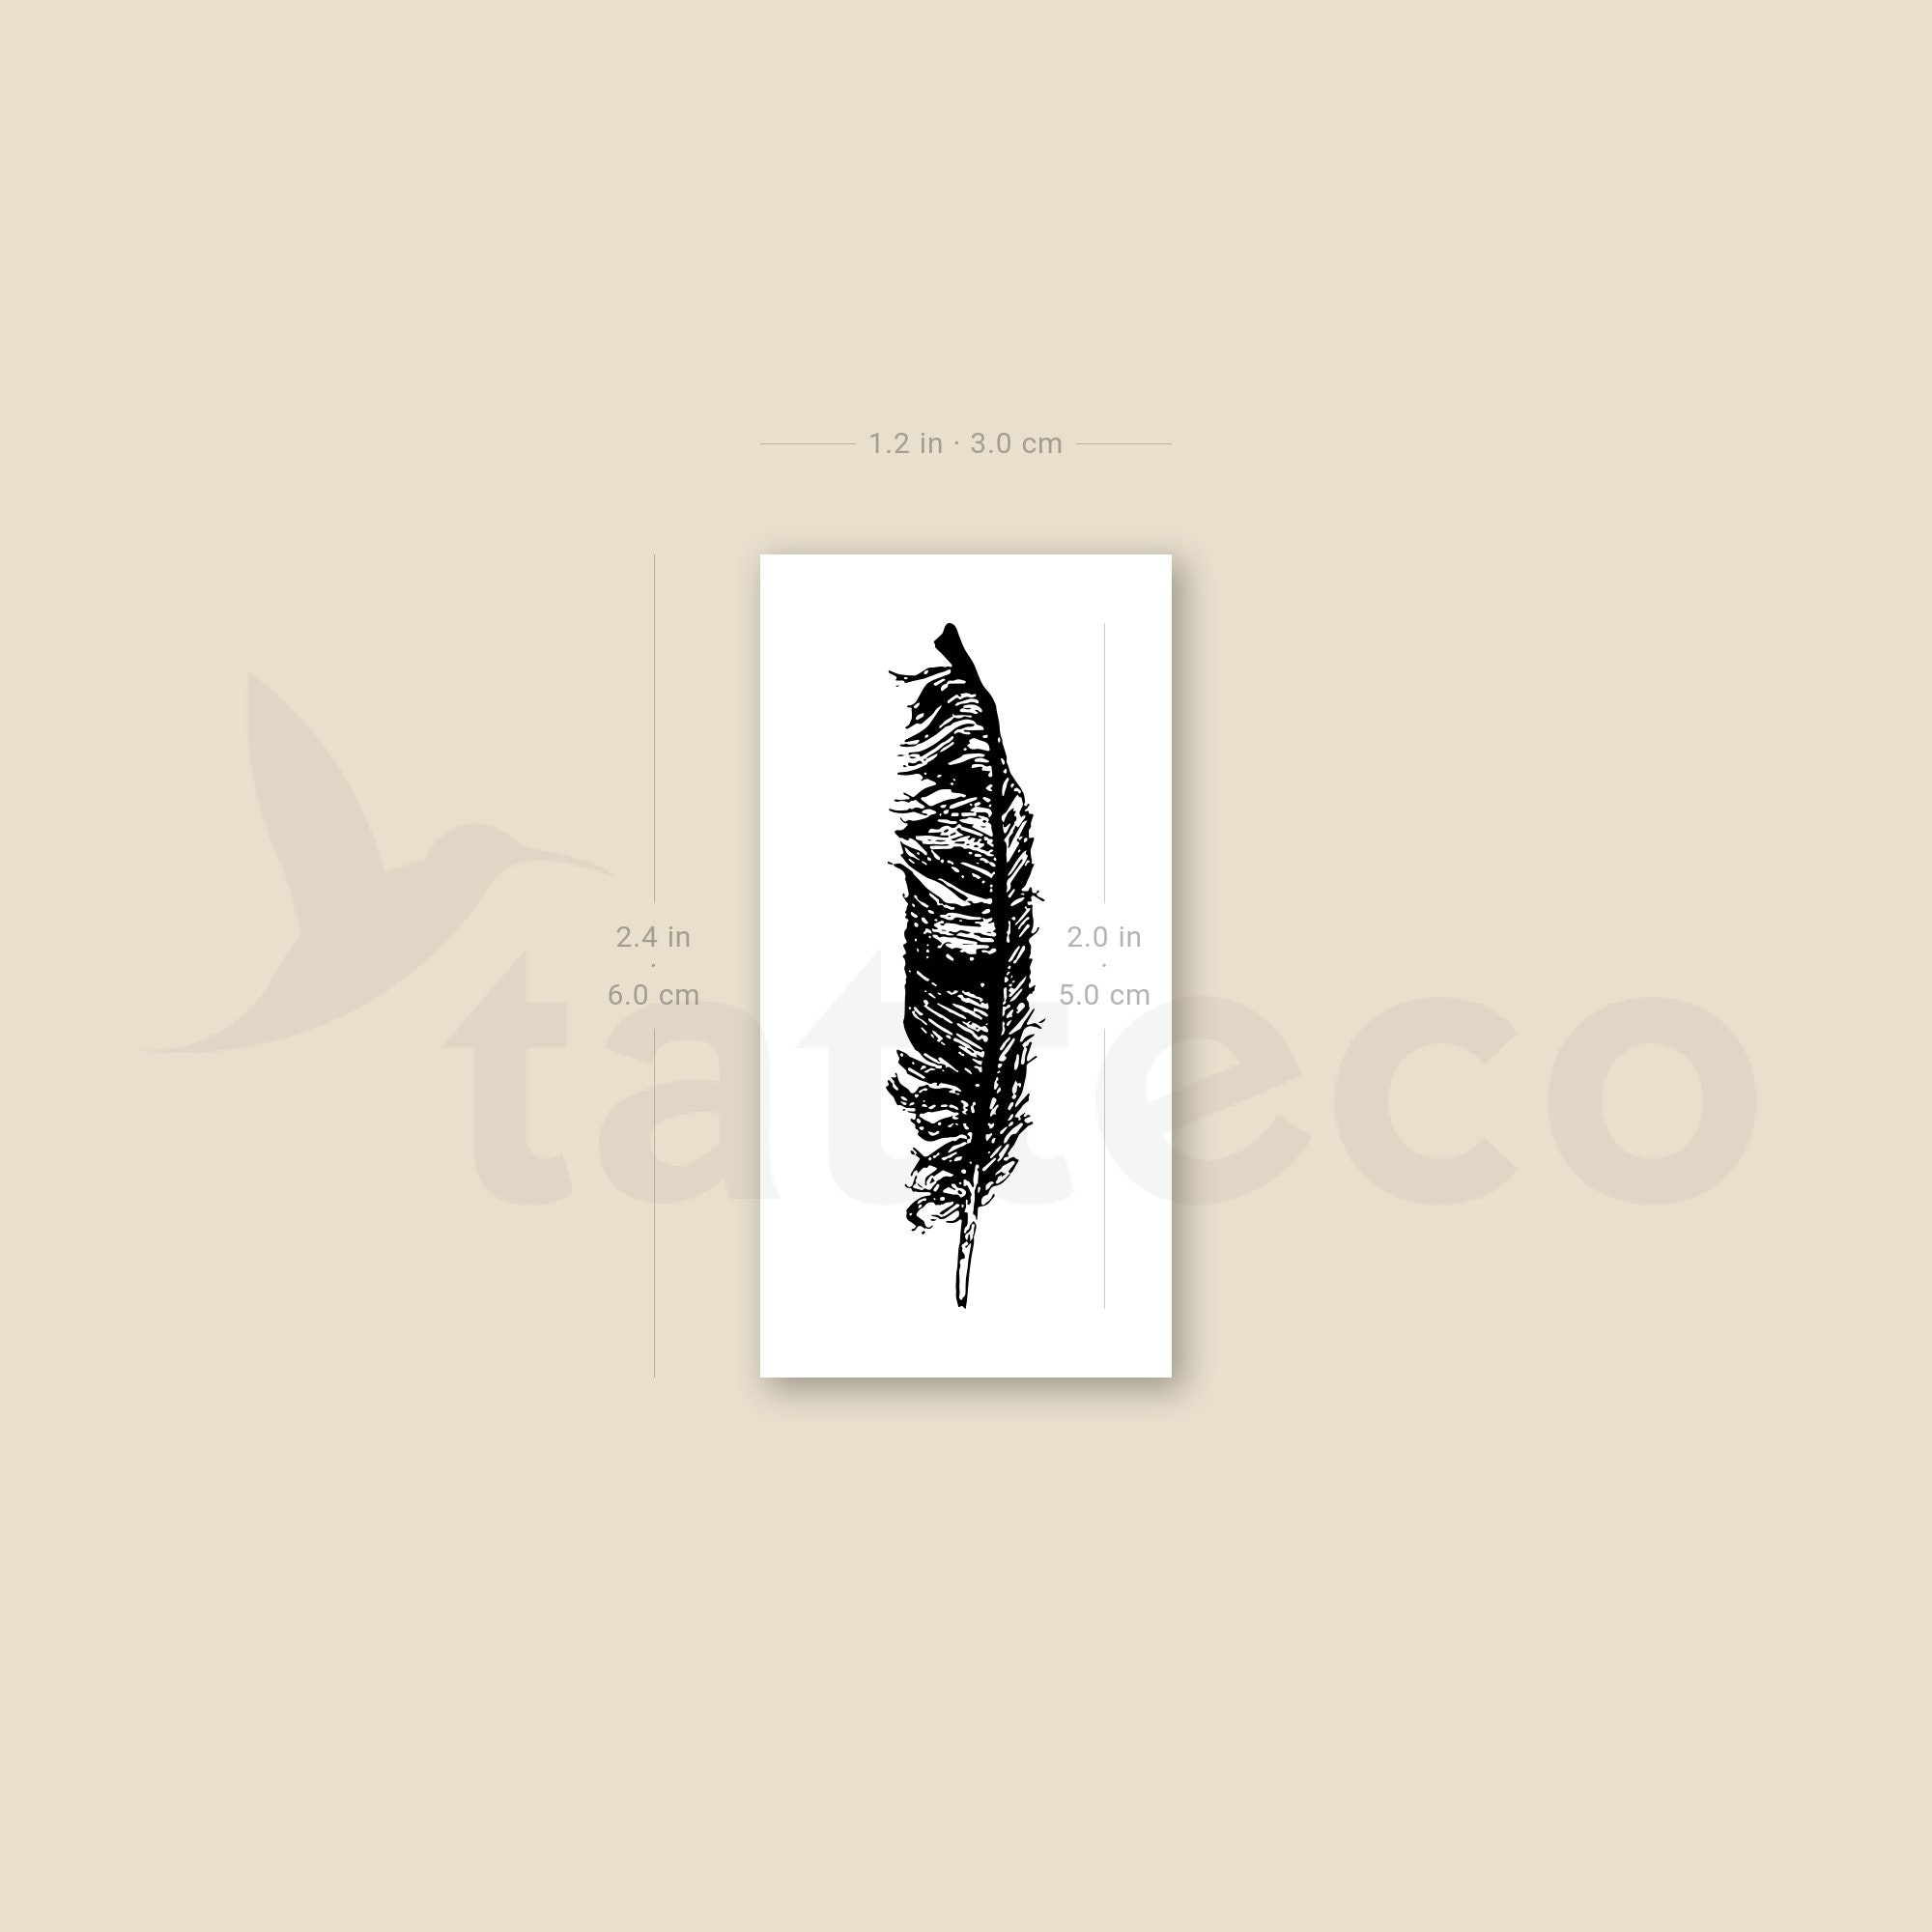 YSYYSH Feather Tattoo Stickers Cover Scars Flower Arm Waterproof Female  Sense Lasting Tattoo Stickers 2 Sheets Temporary Tattoos : Amazon.ae: Beauty